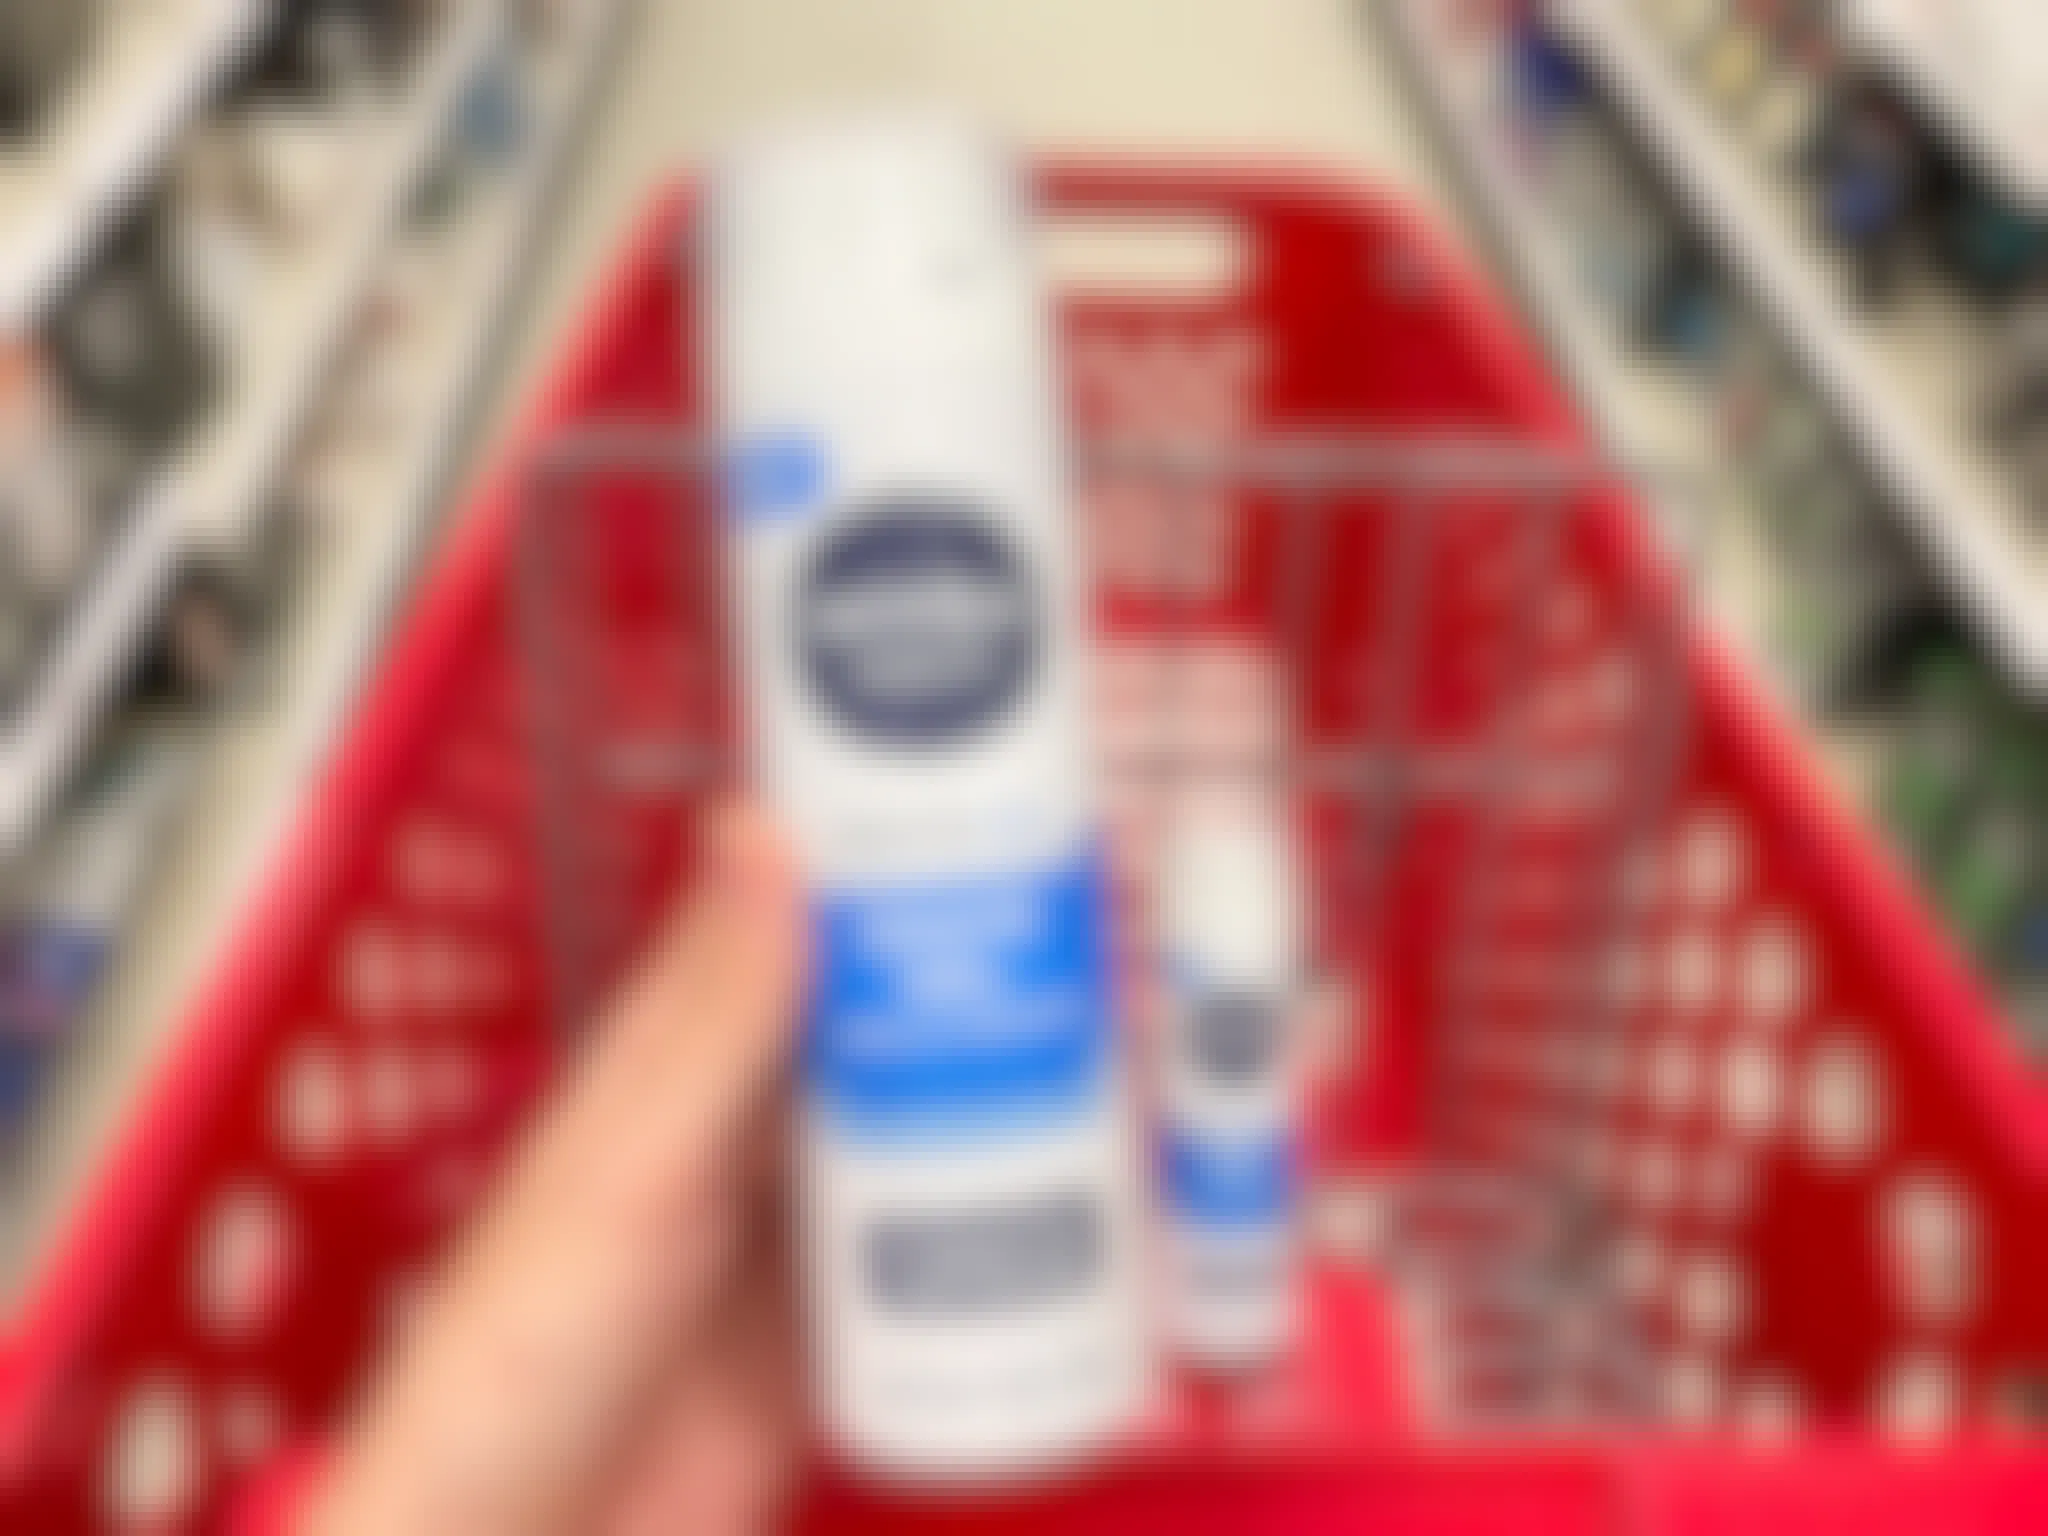 A can of Nivea Men sensitive cool shave gel held out in front of a shopping cart with another Nivea men sensitive cool shave cream.